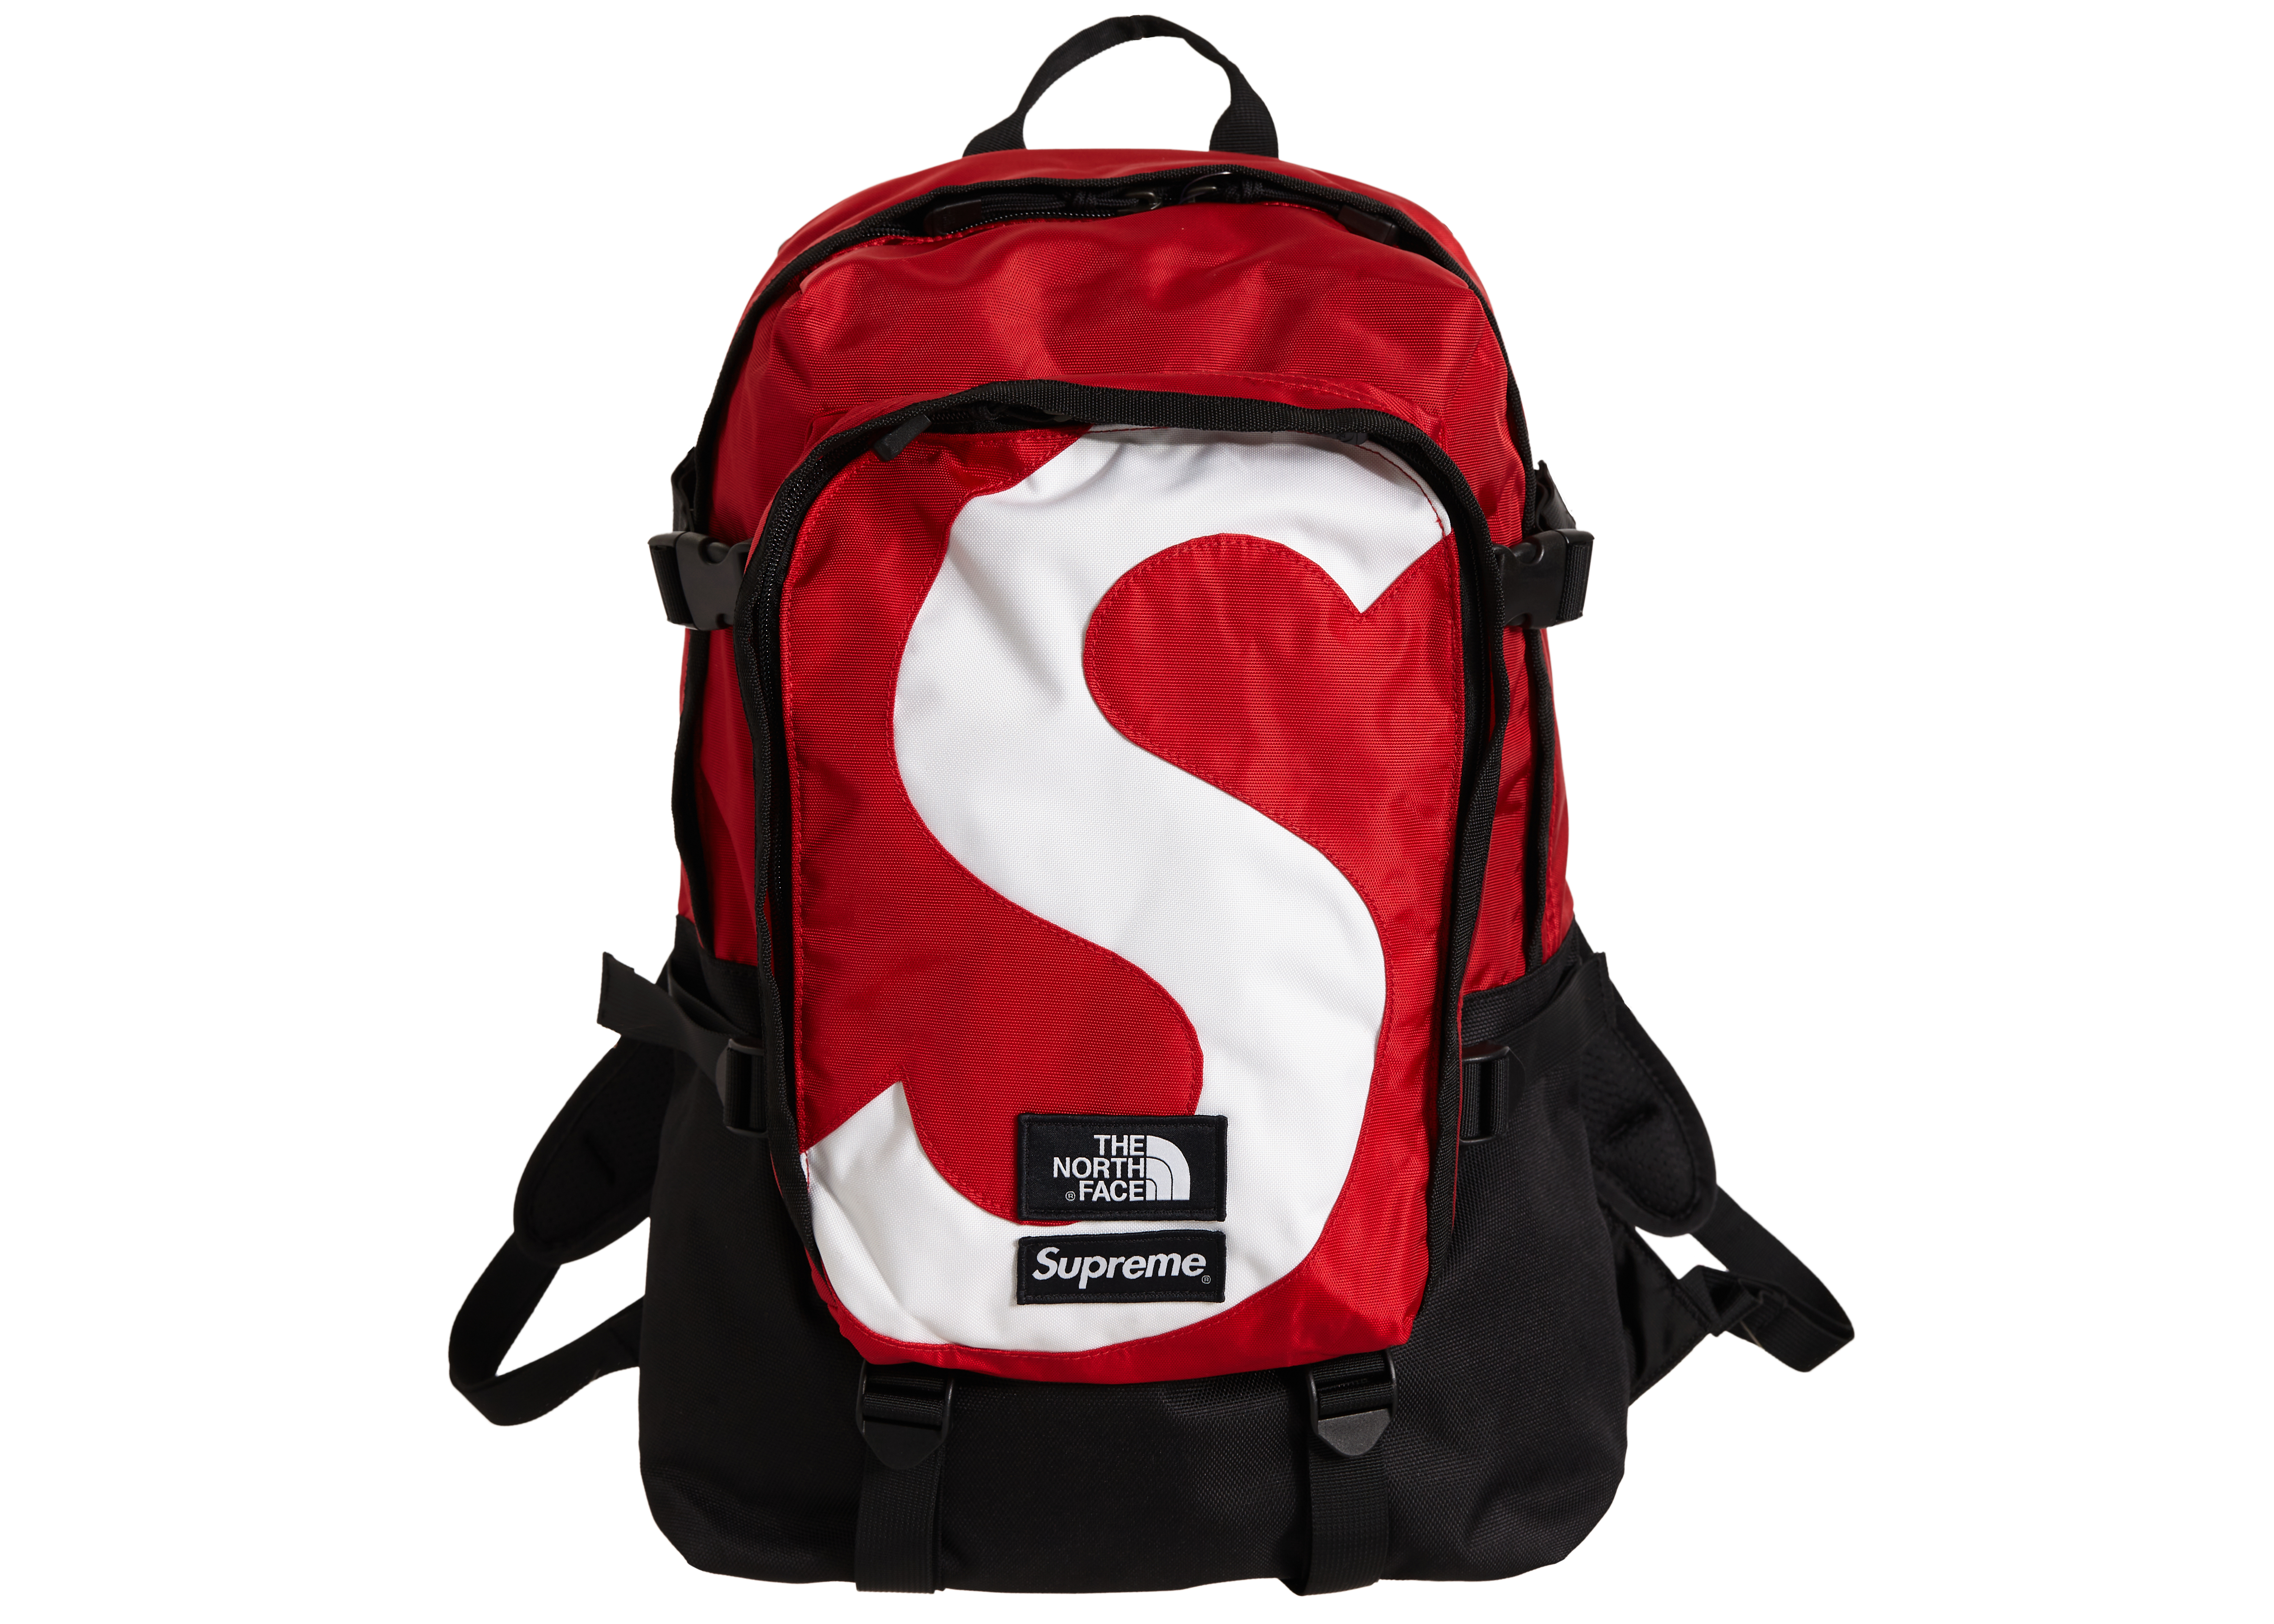 north face backpack grey and red